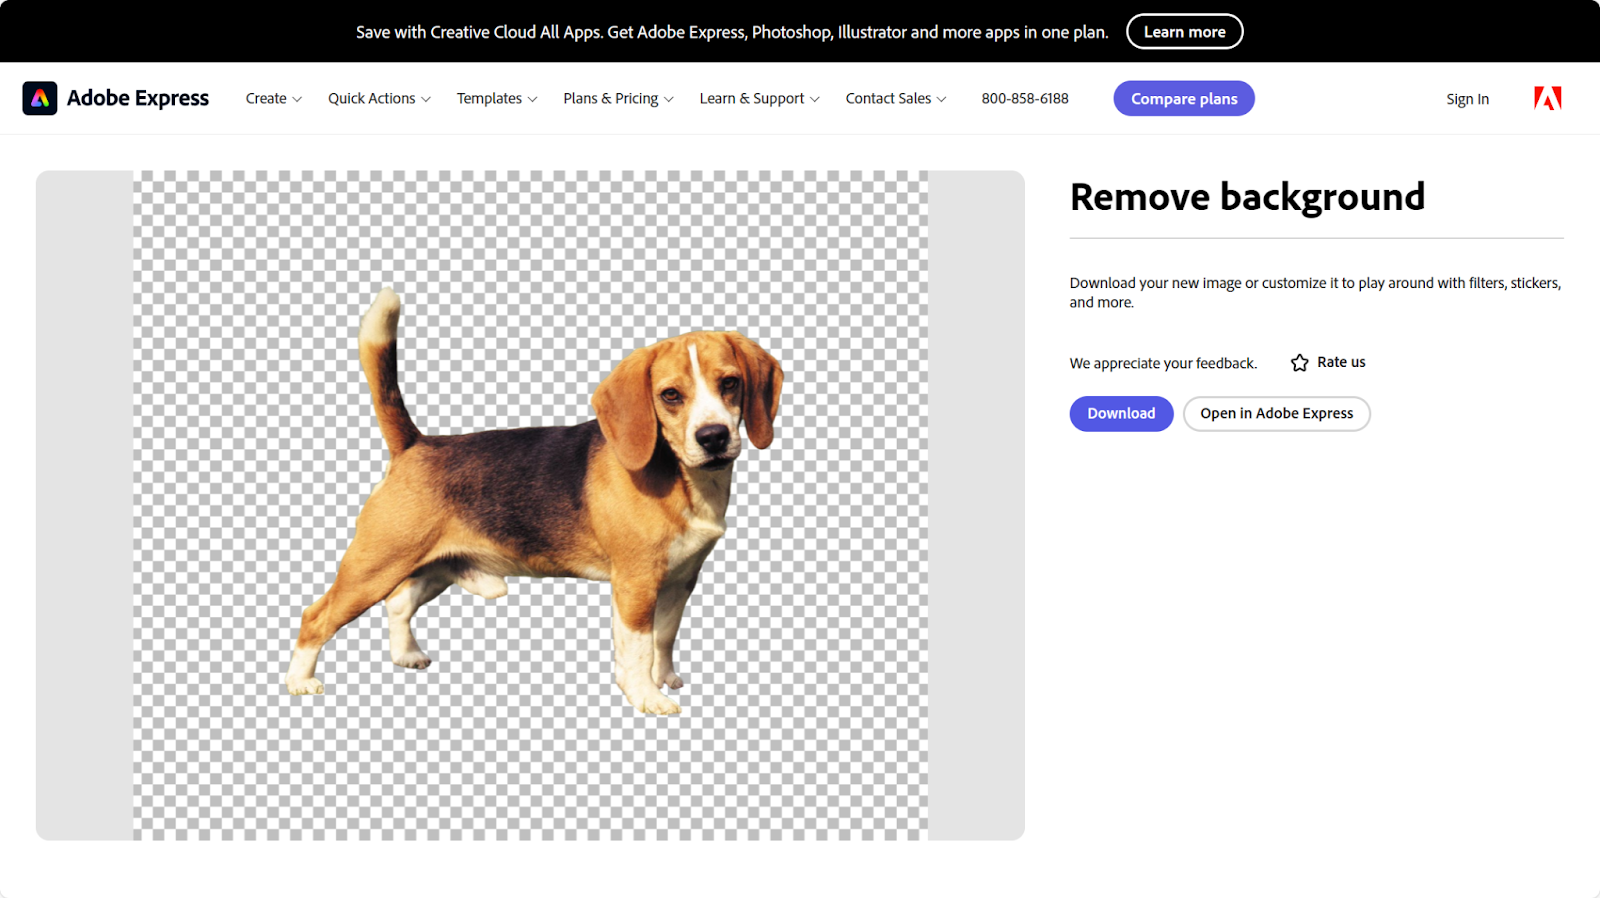 Remove a dog's background on Adobe Express